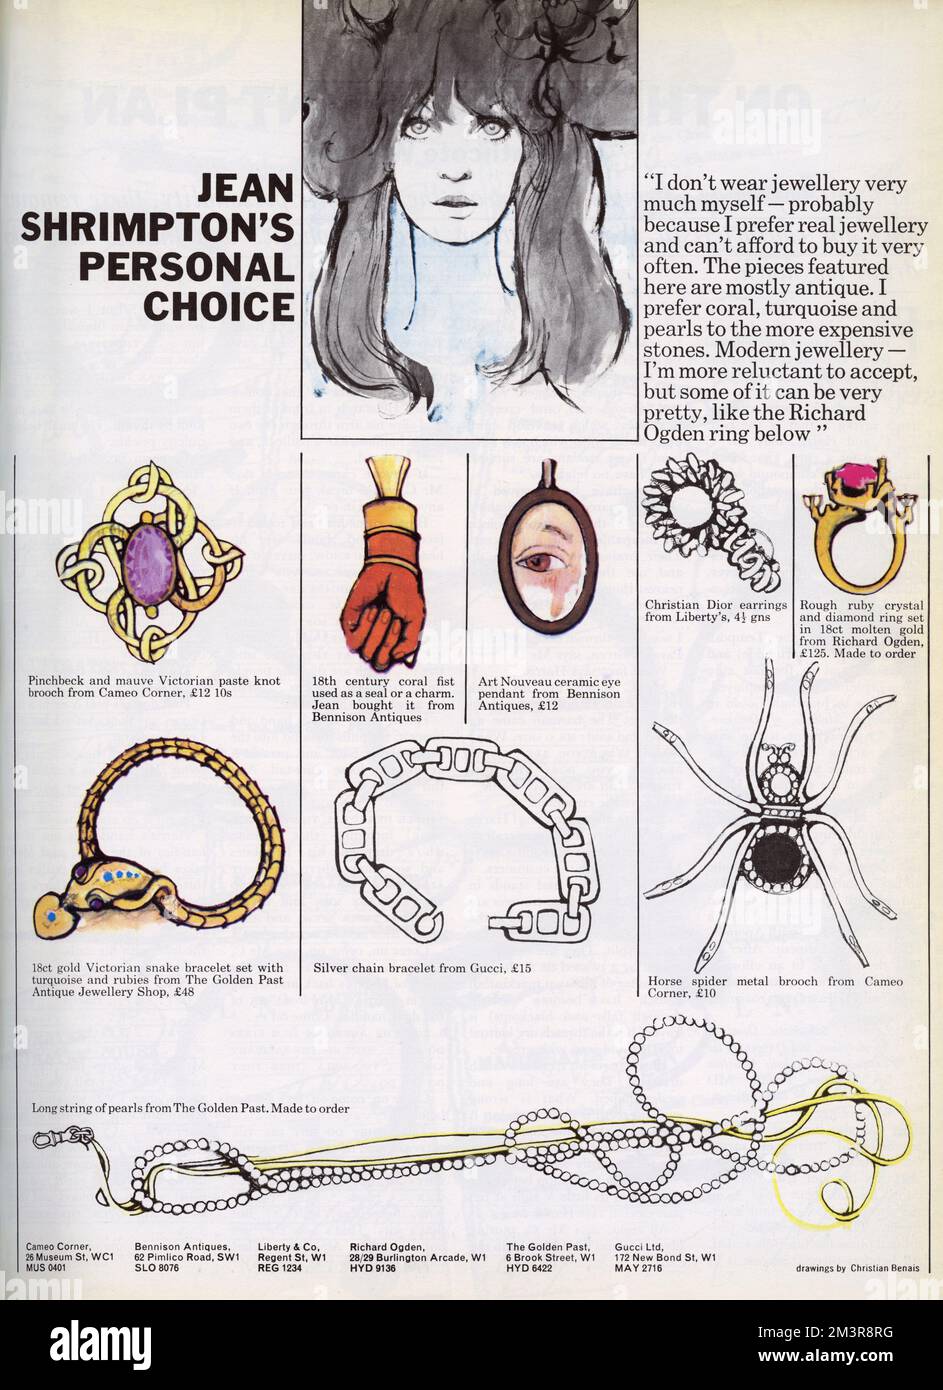 Page from London Life magazine featuring some jewellery suggestions by British model, Jean Shrimpton (whose portrait appears at the top of the page).  Jean chooses mainly antique pieces but also suggests a ruby and crystal ring by Richard Ogden.       Date: 1965 Stock Photo